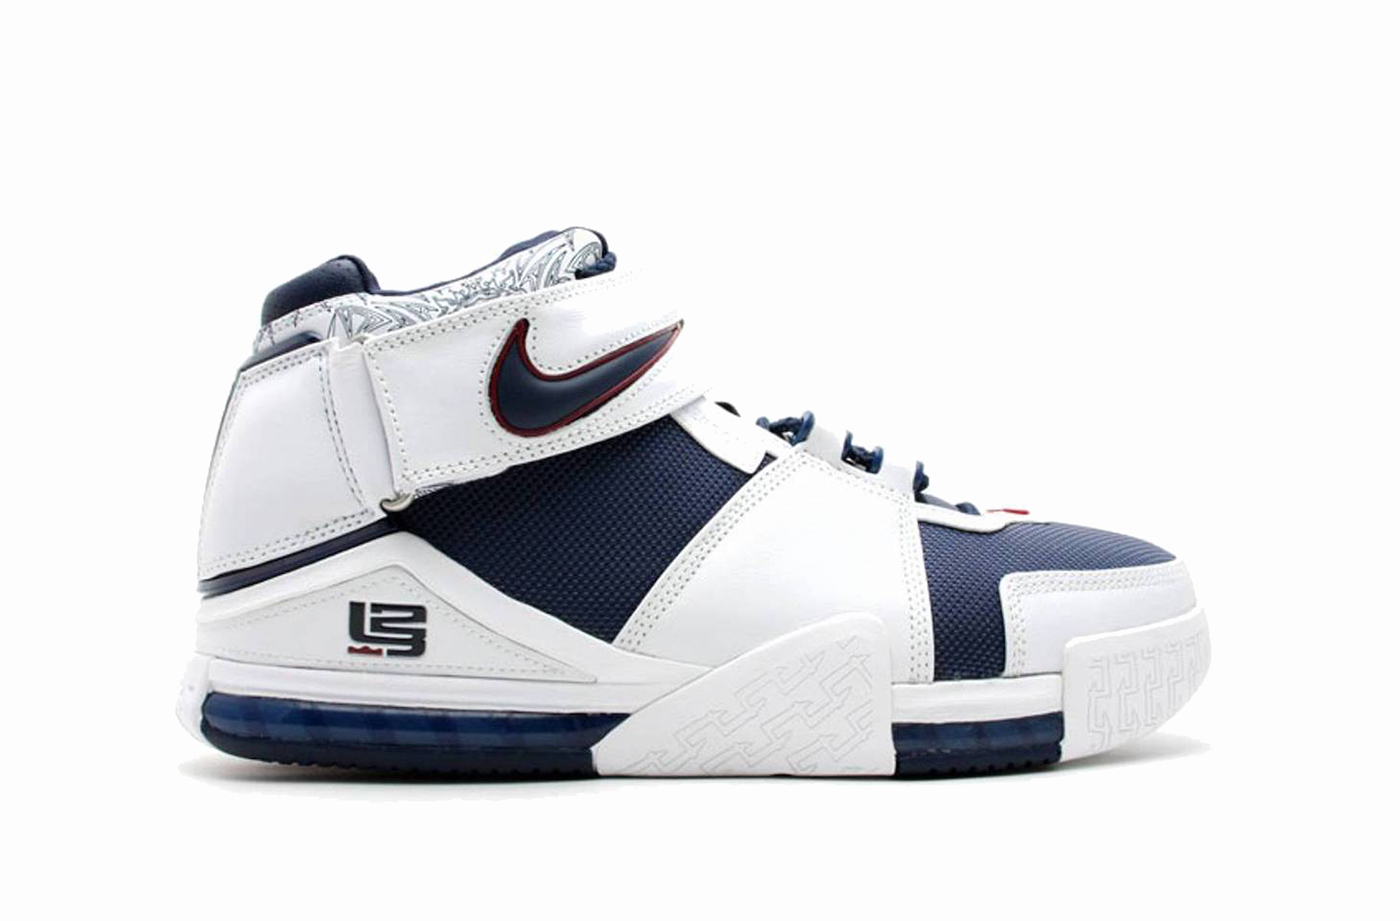 Nike LeBron Soldier 8 USA - Release Date 